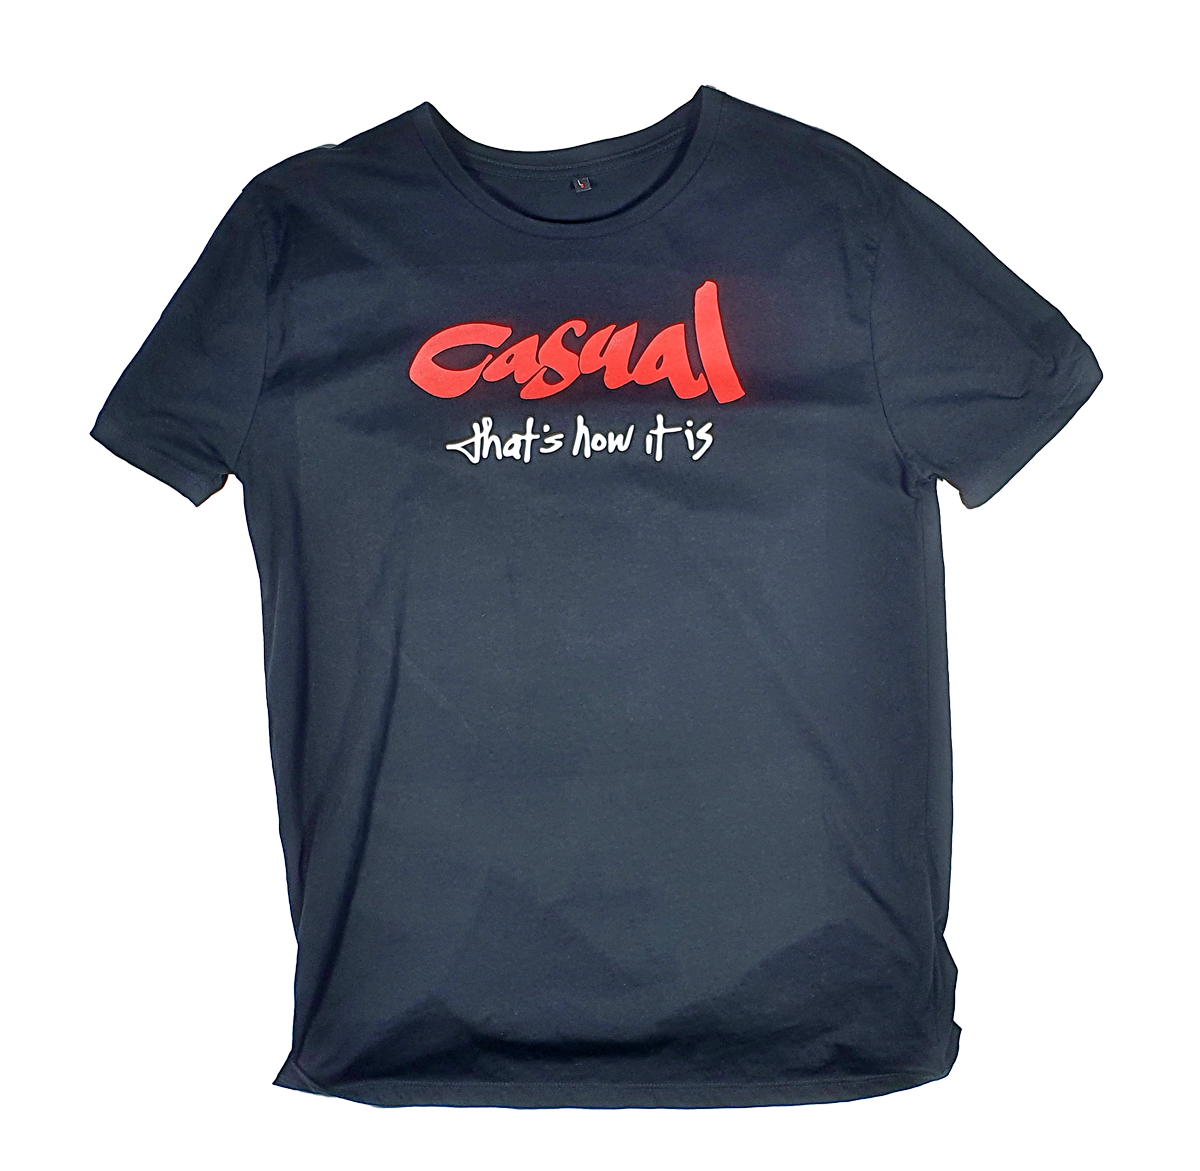 Casual - That's how it is - T Shirt